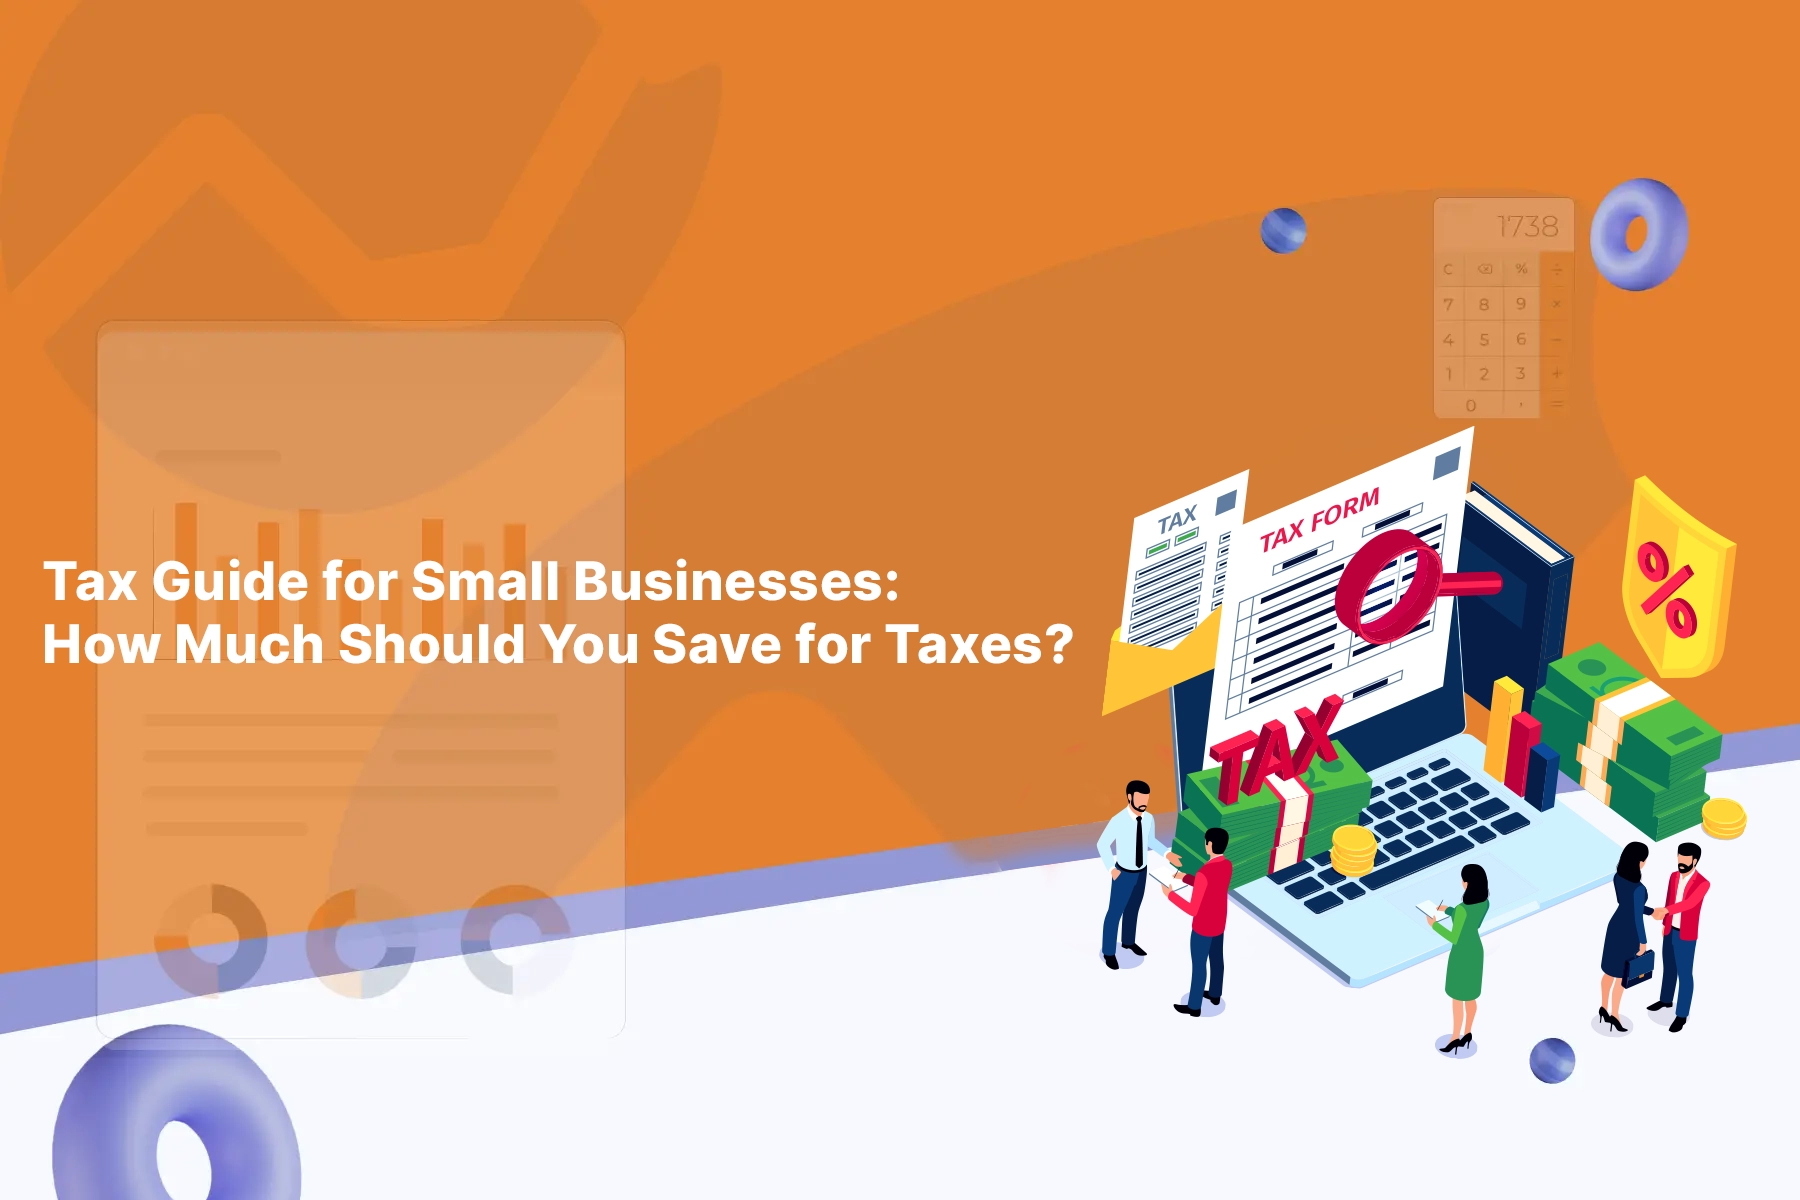 Tax Guide for Small Businesses: How Much Should You Save for Taxes?